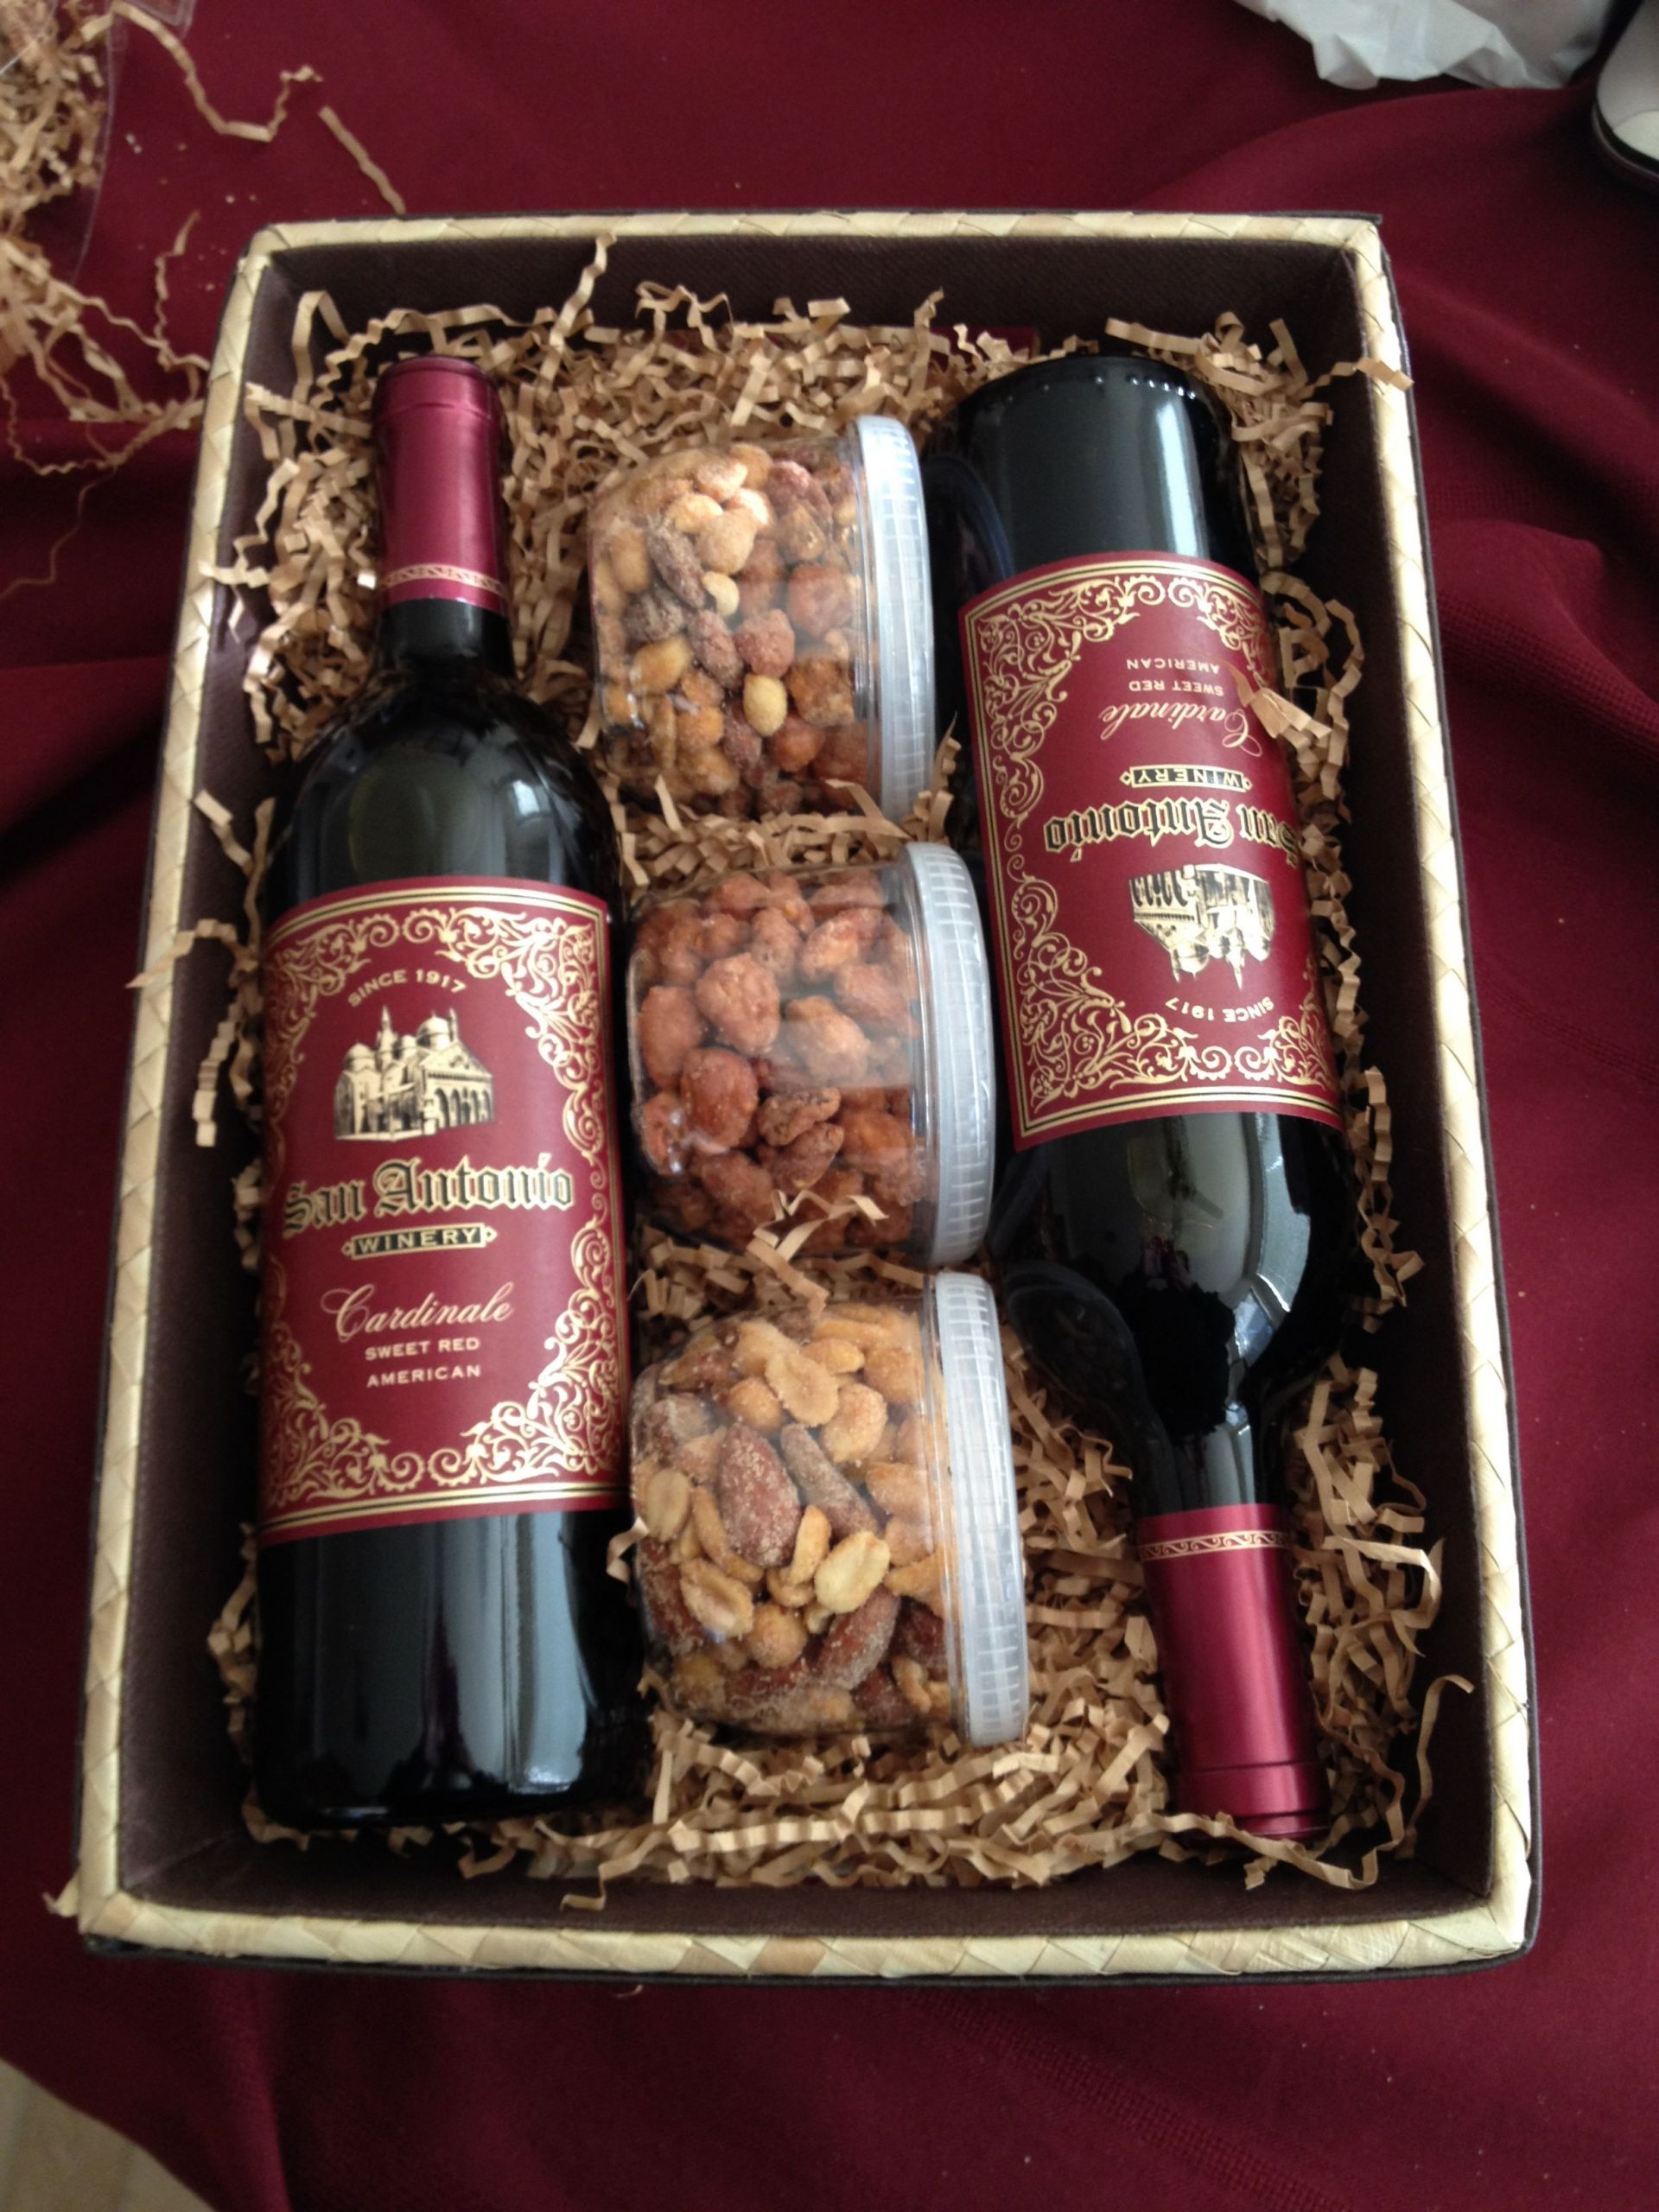 How To Make A Wine Gift Basket Ideas
 Wine Gift Basket Nuts are a good idea to add to the wine